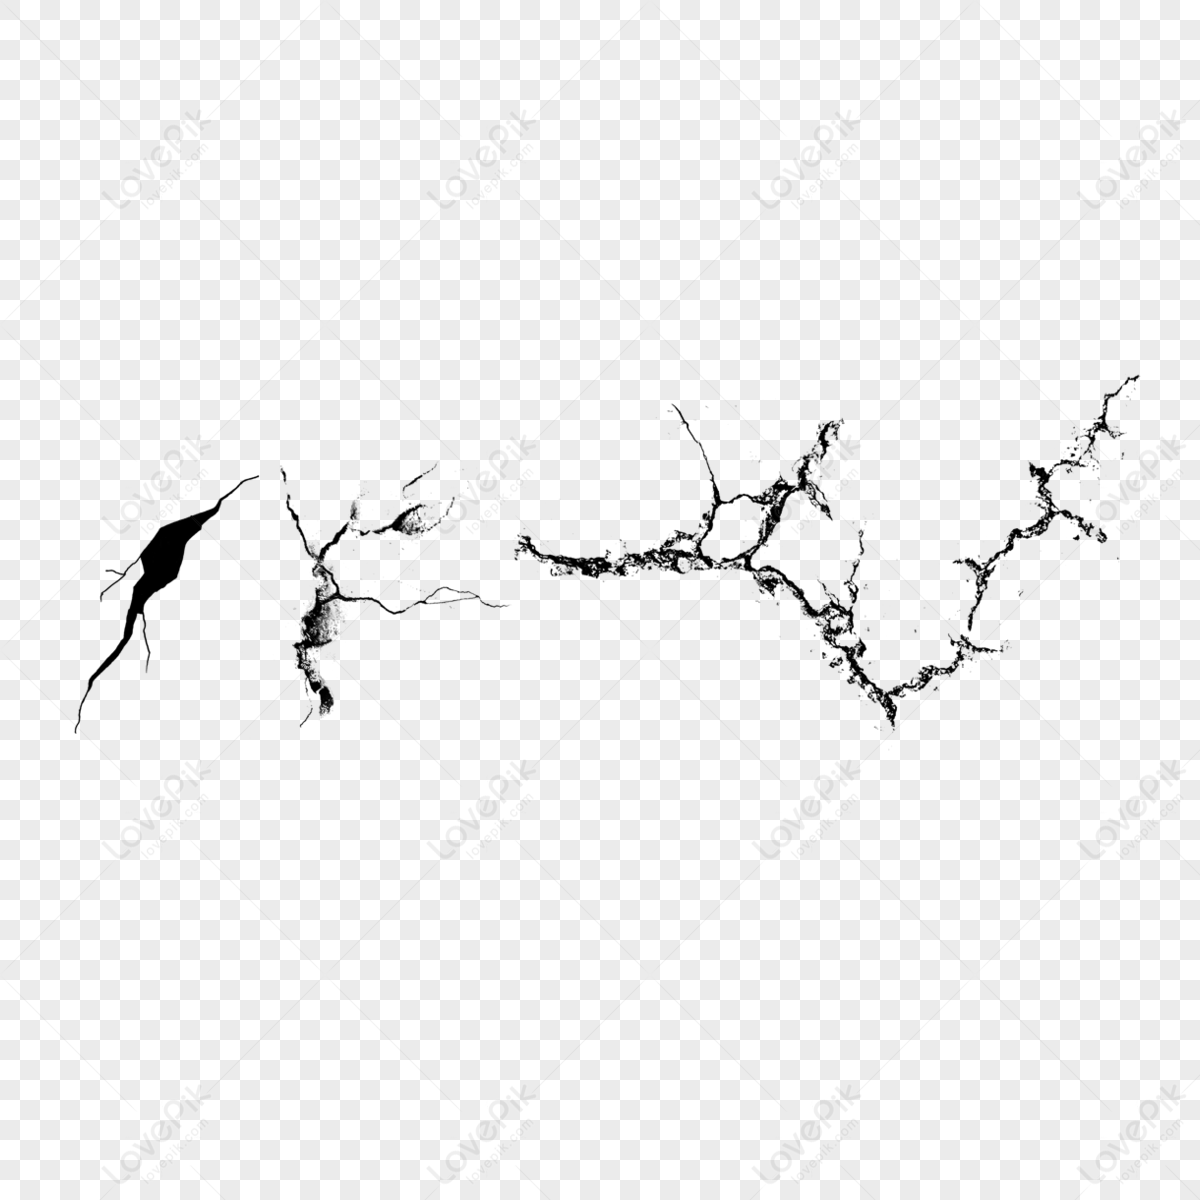 Slender PNG, Vector, PSD, and Clipart With Transparent Background